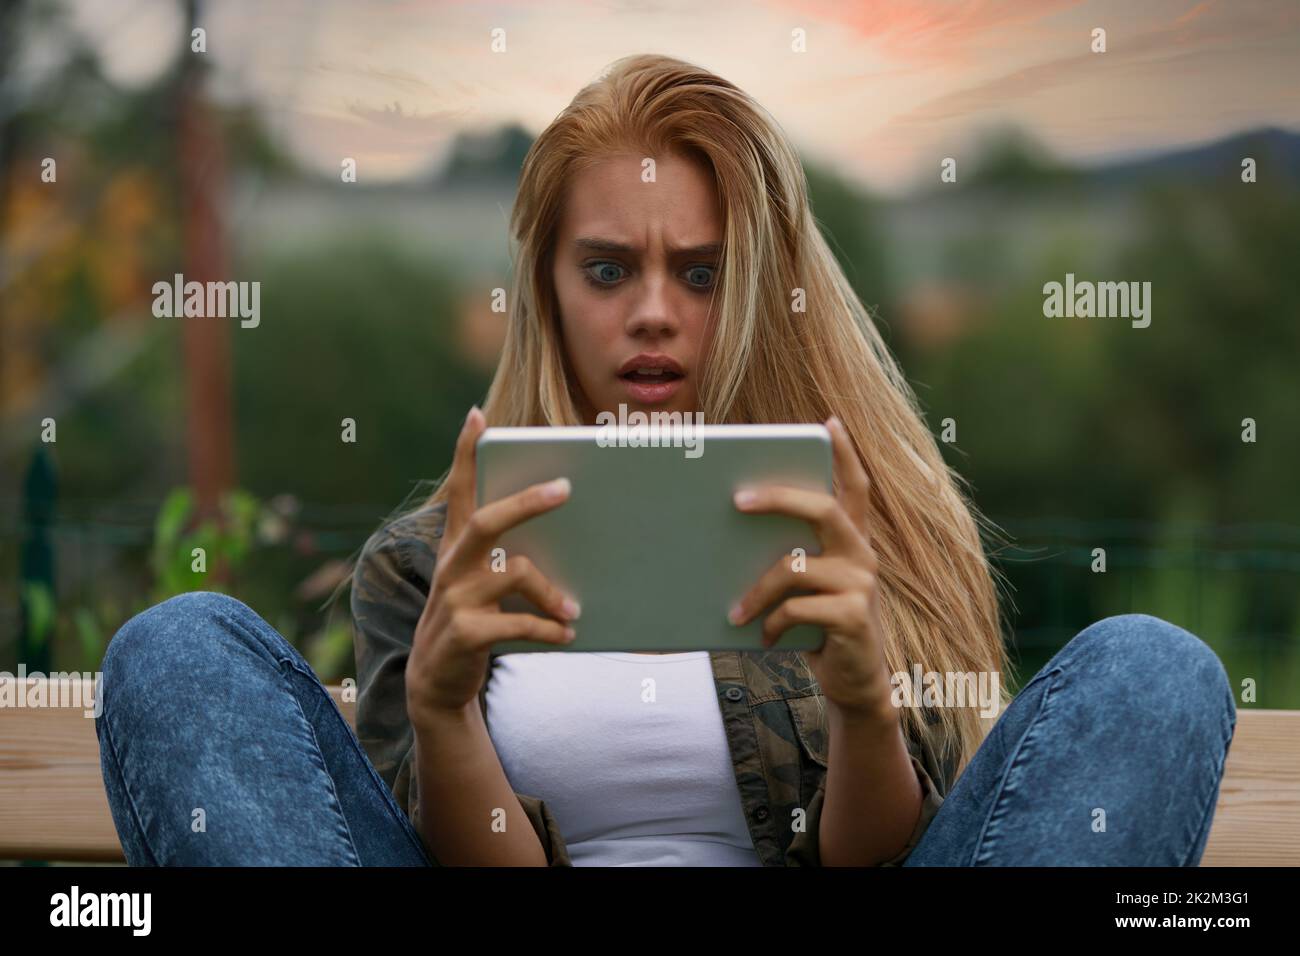 Horrified young woman staring wide-eyed at her tablet Stock Photo